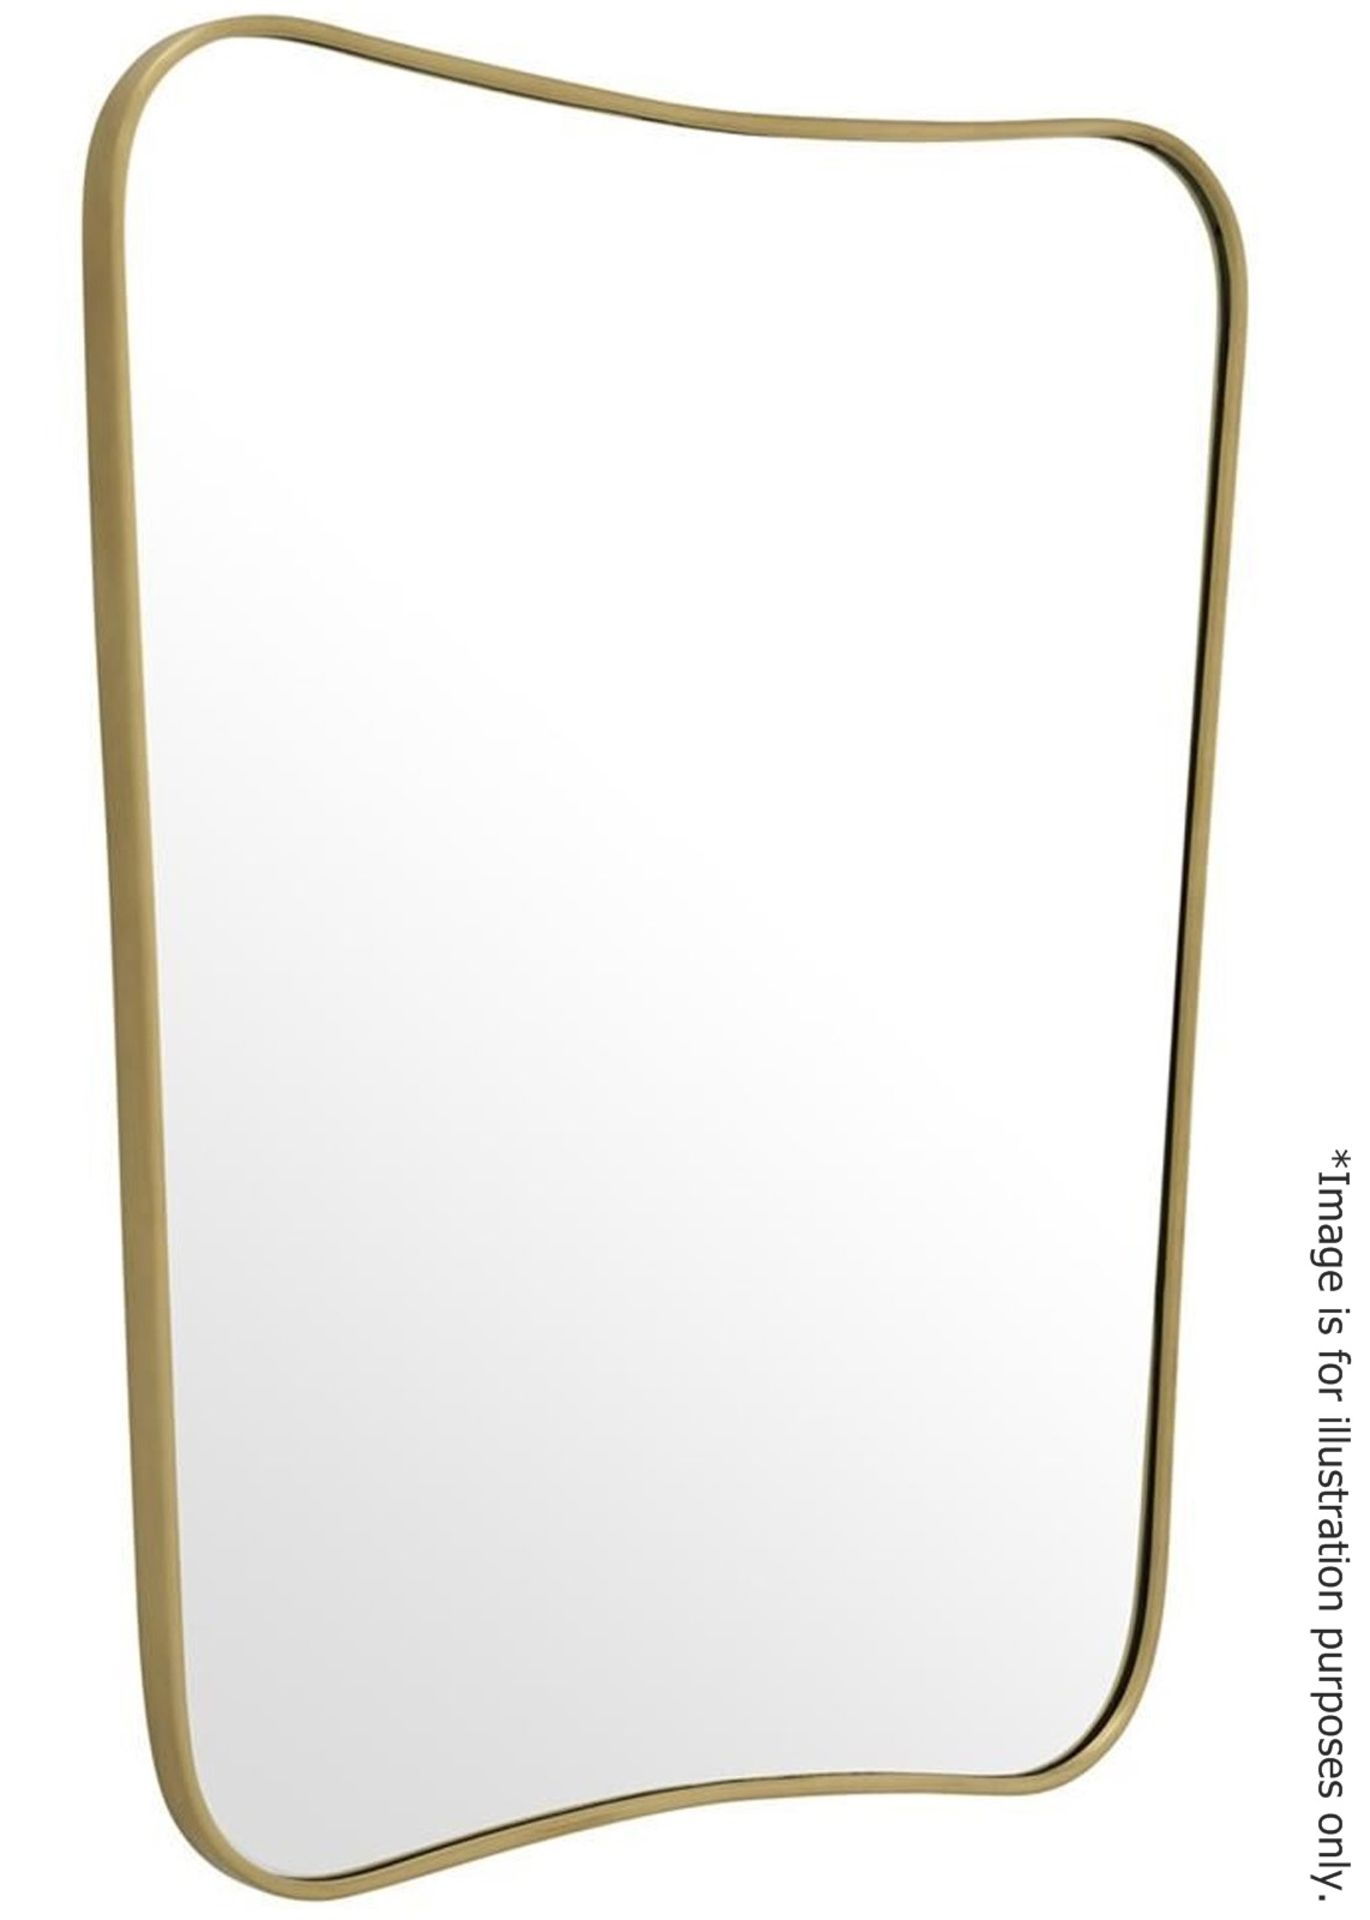 1 x EICHHOLTZ 'Vivienne' Luxury Framed Mirror In A Brushed Brass Finish - Dimensions: - Ref: - Image 2 of 8